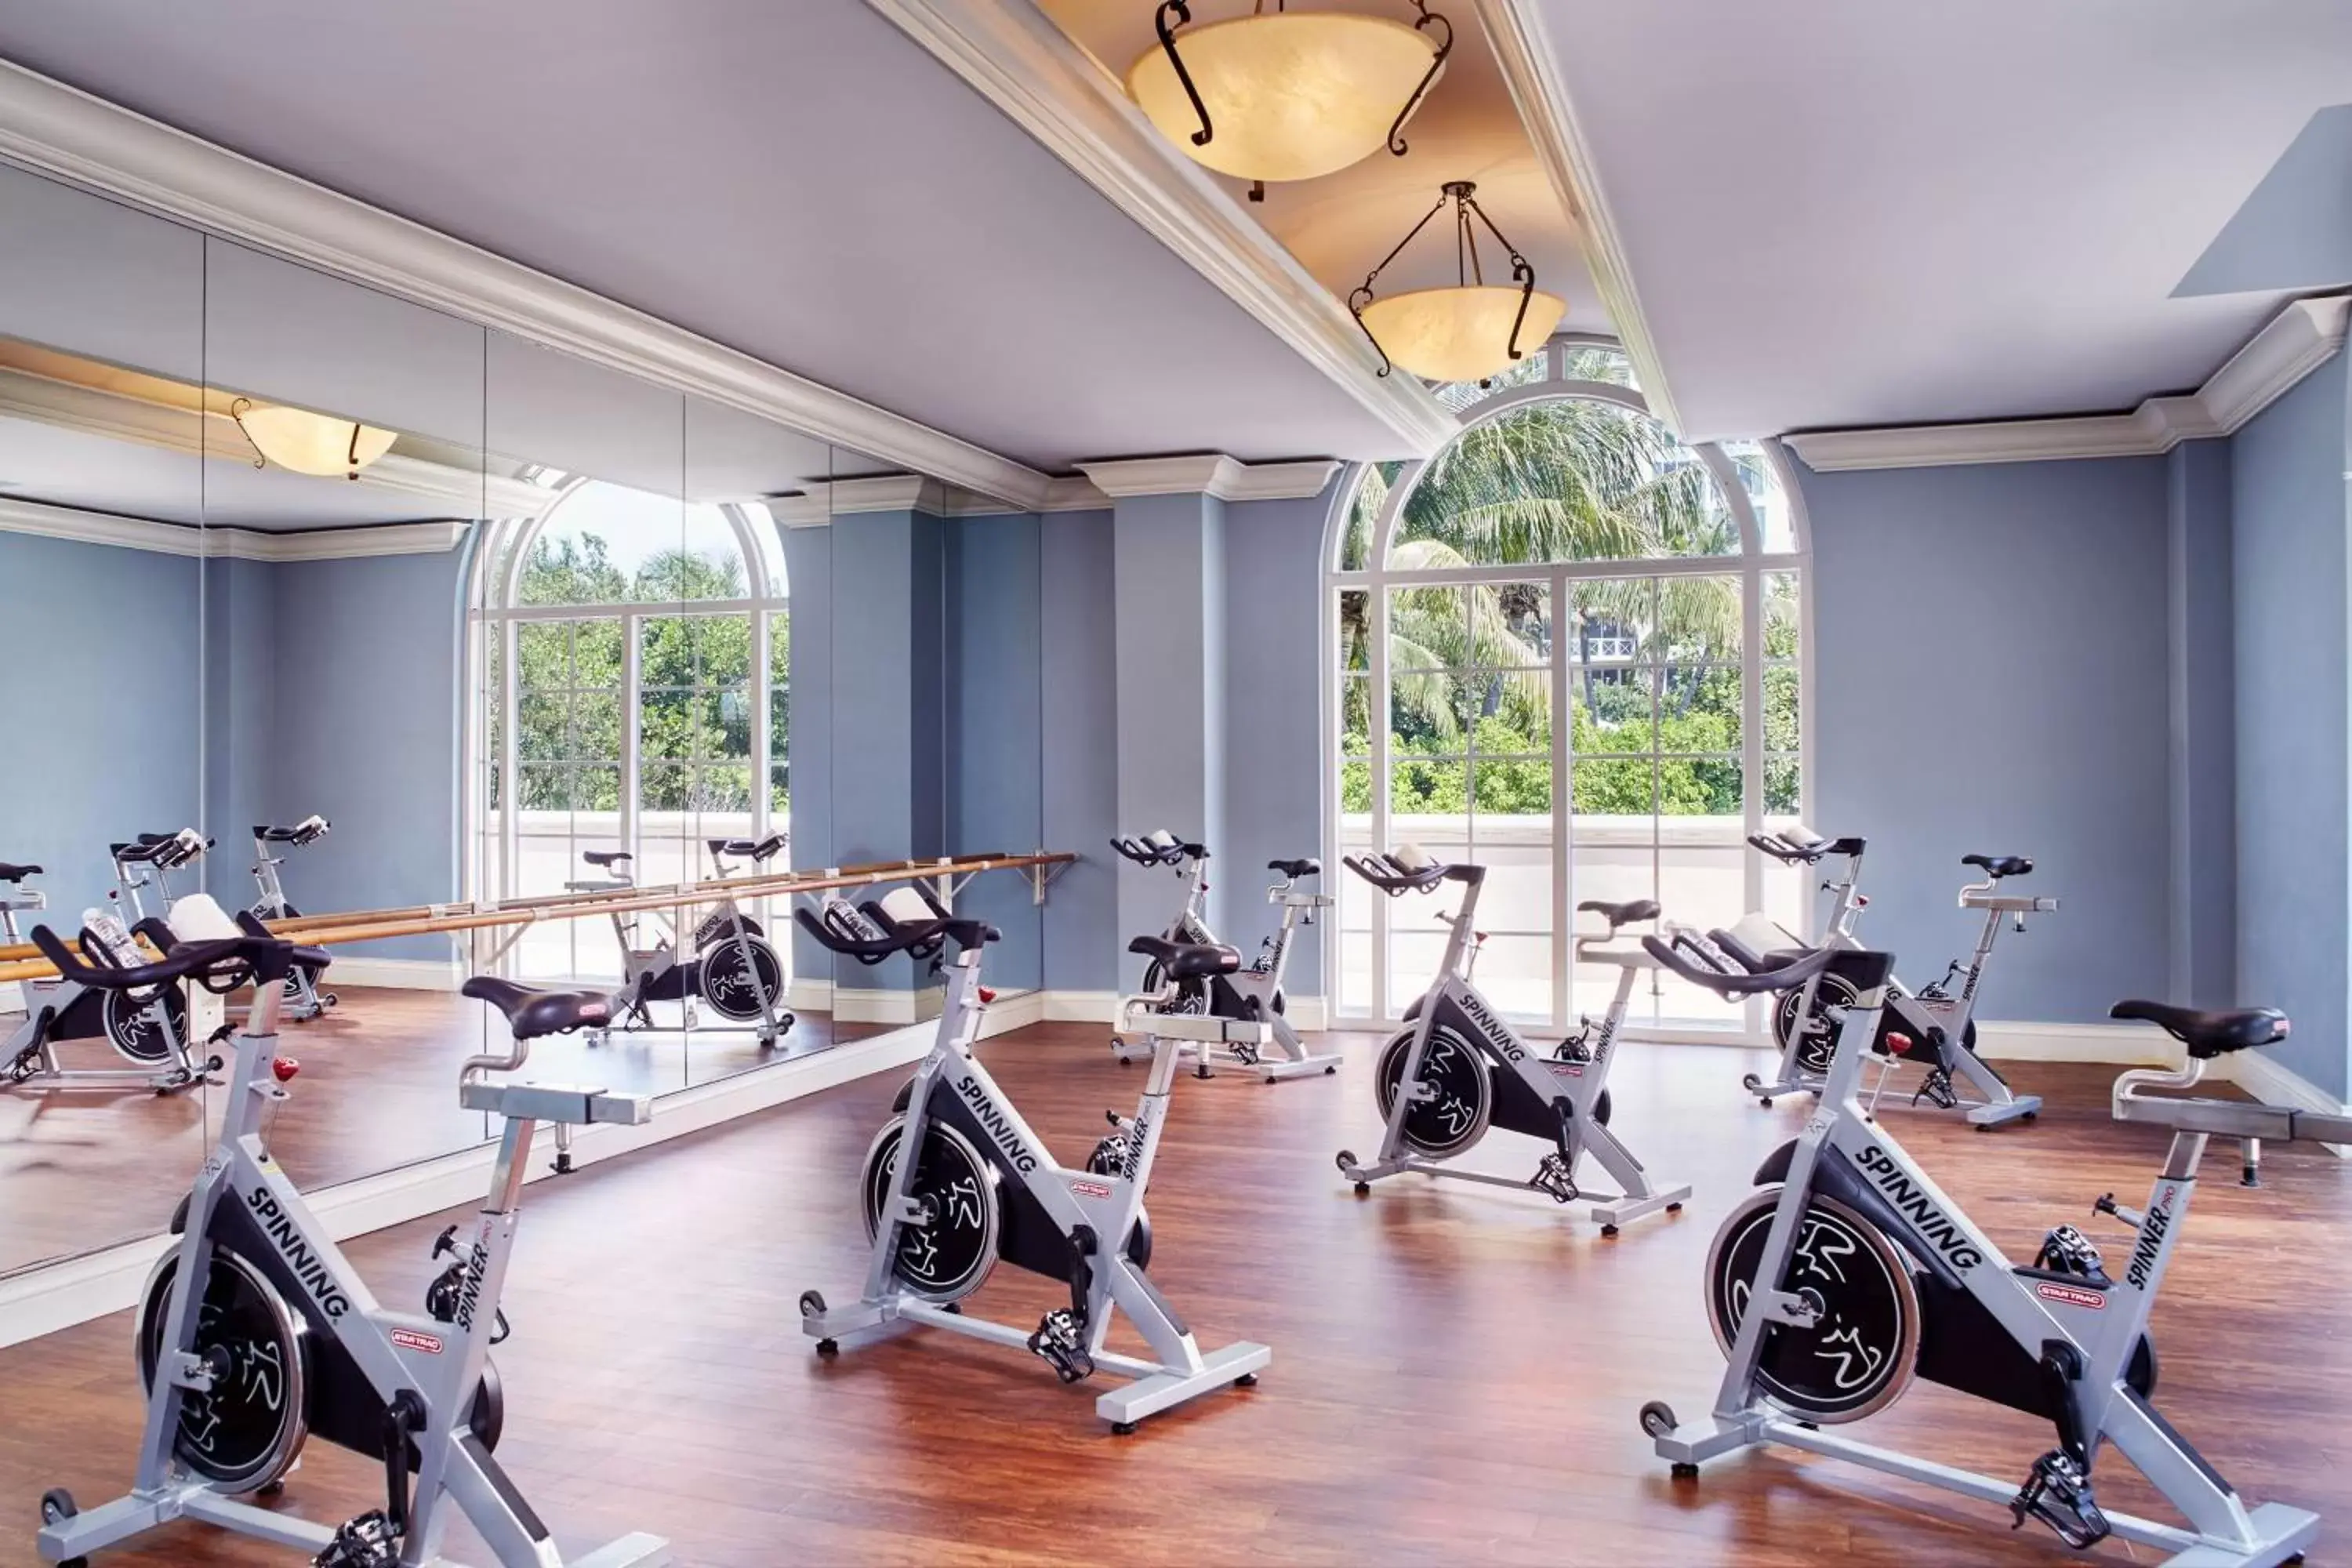 Area and facilities, Fitness Center/Facilities in The Ritz Carlton Key Biscayne, Miami